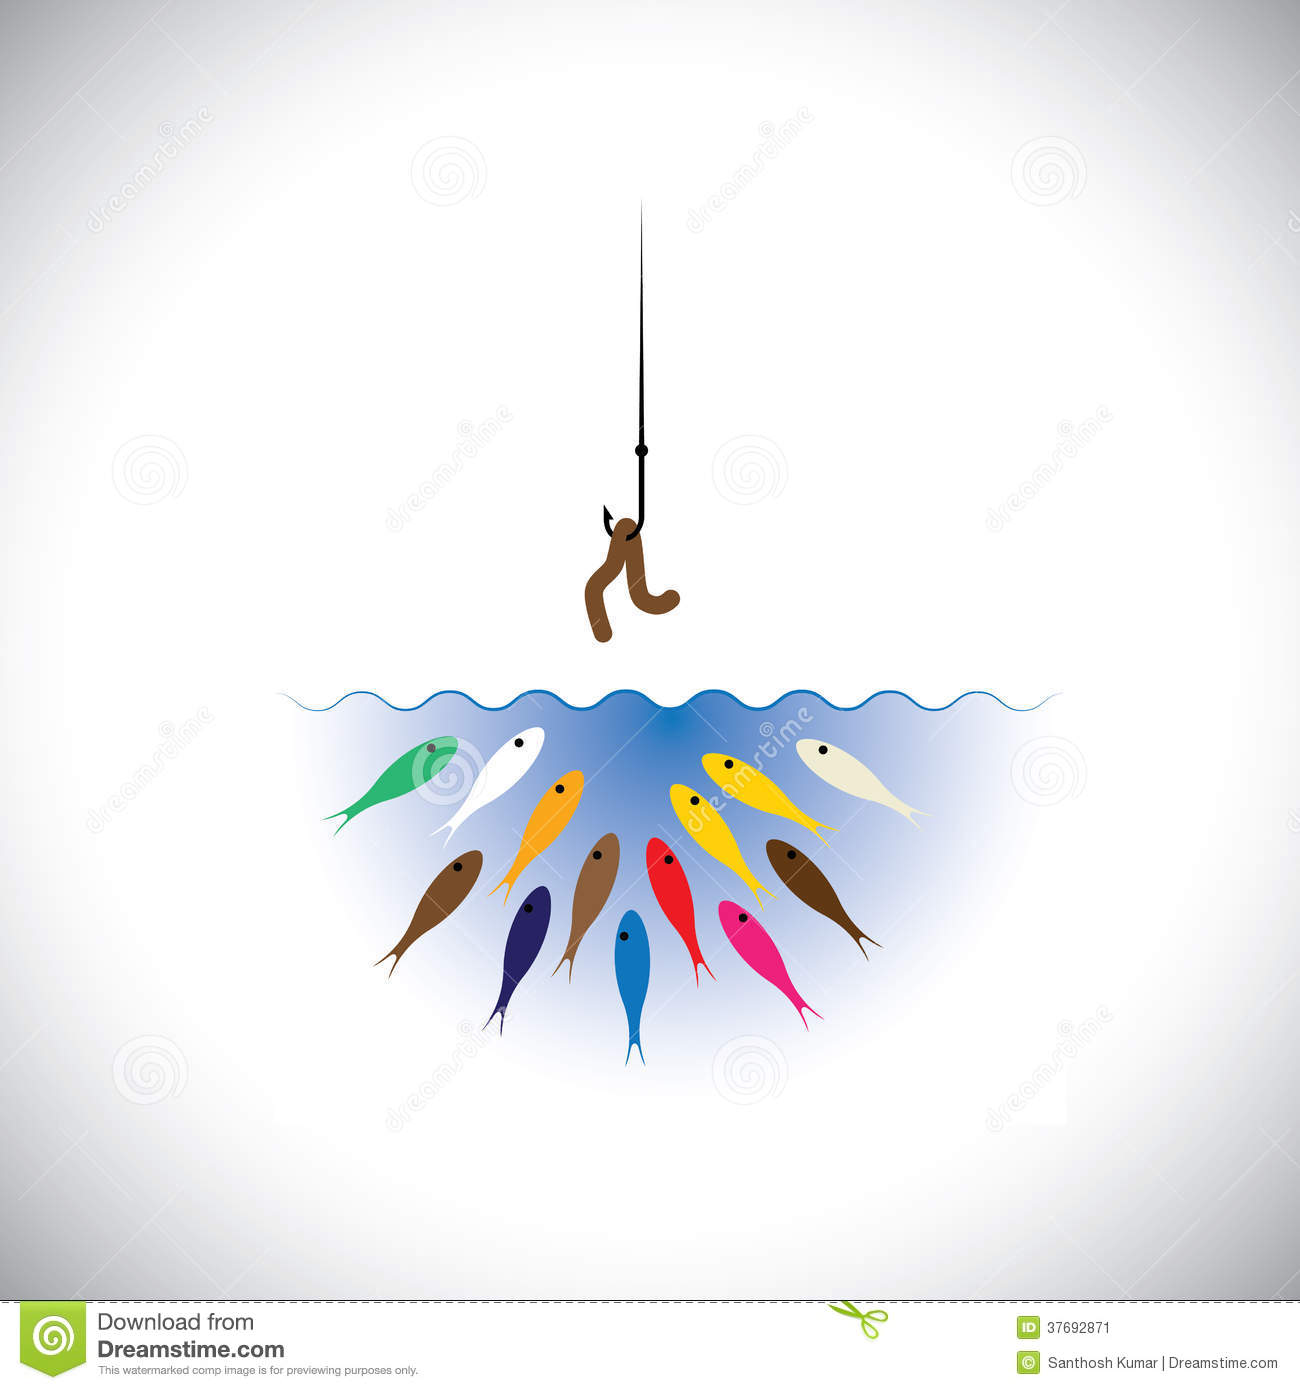 Fish Hook With Worm As Bait For Fishing  Concept Stock Image   Image